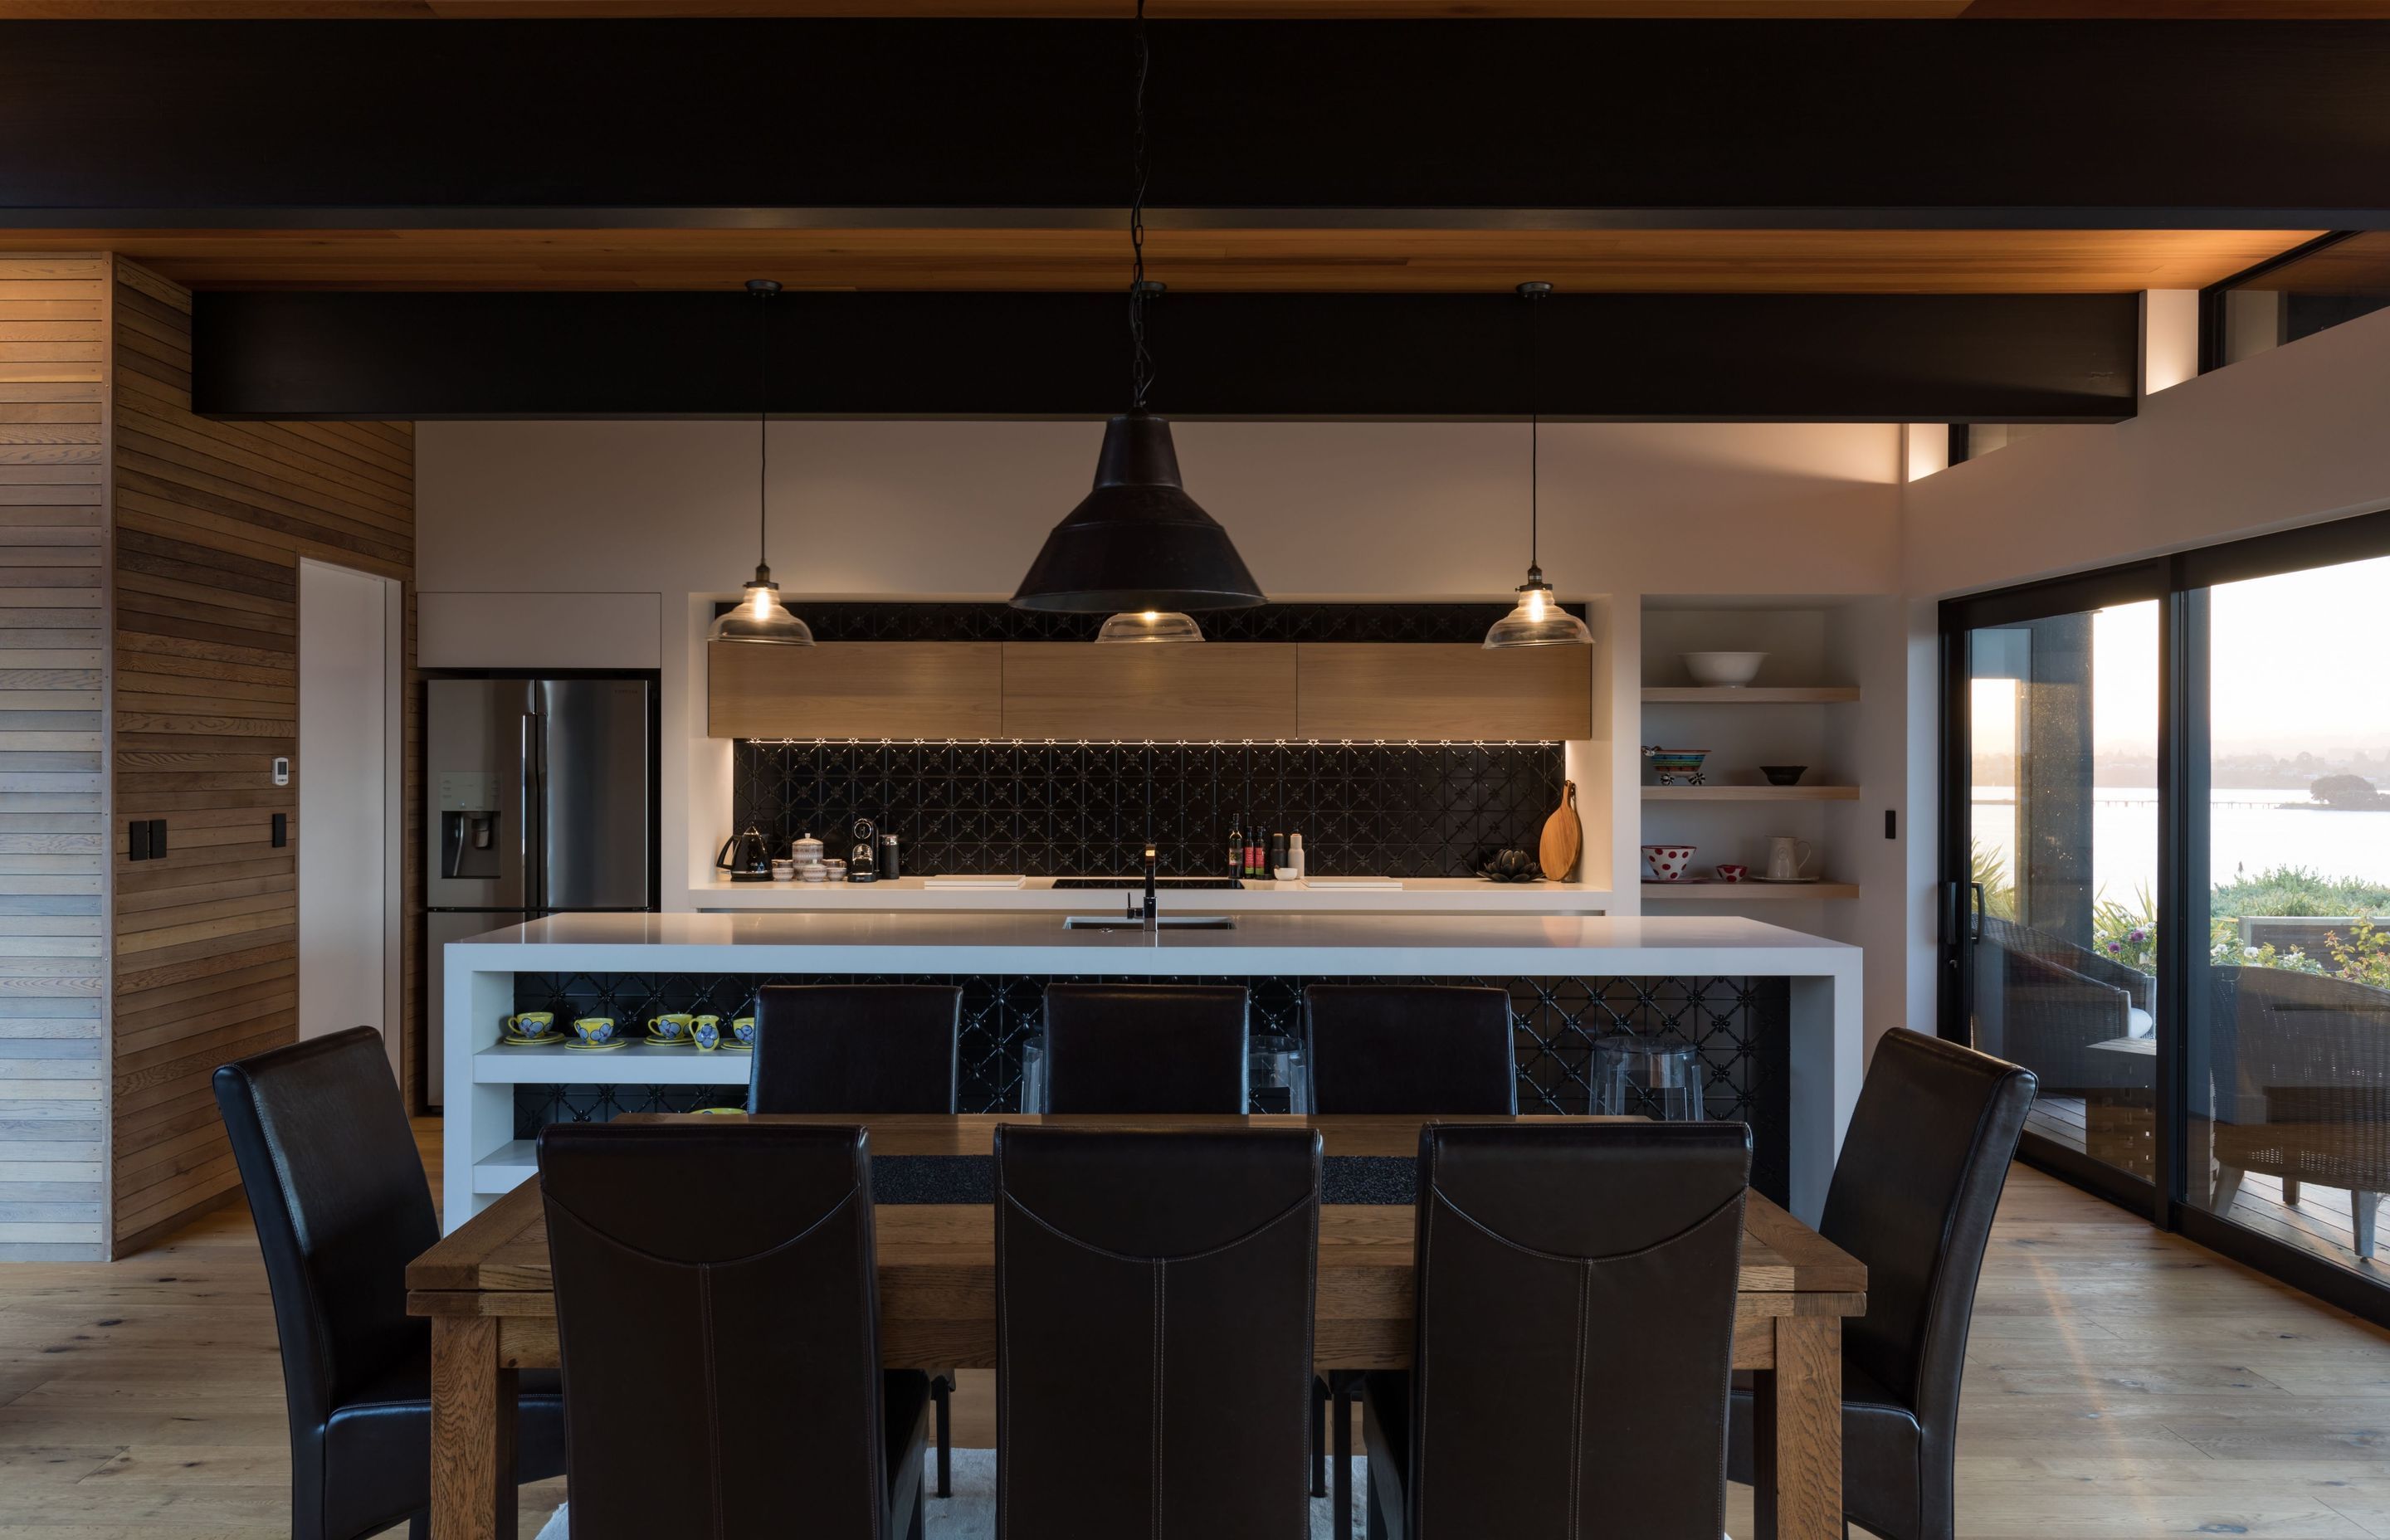 The hub of the house, the kitchen, with a bit of texture and drama with its pressed metal accents and bespoke lighting.